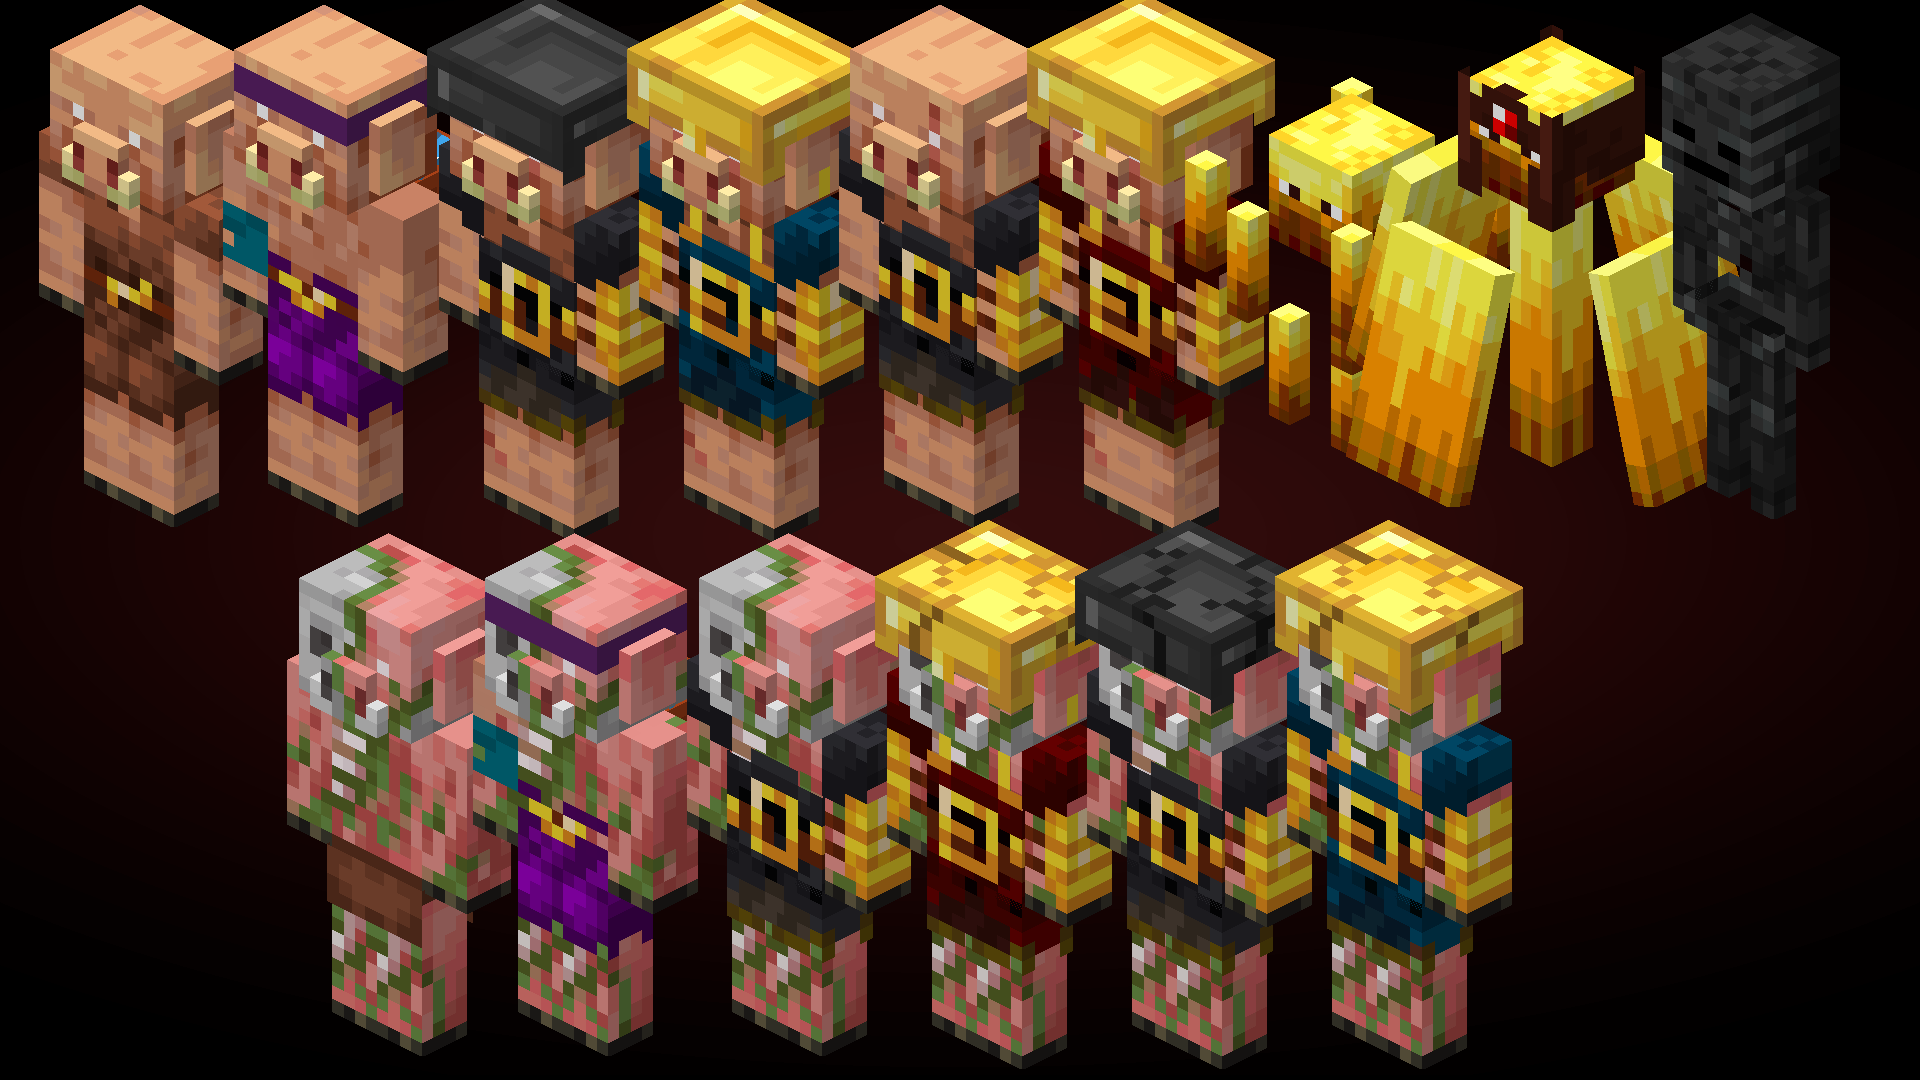 Cool Nether Mobs!